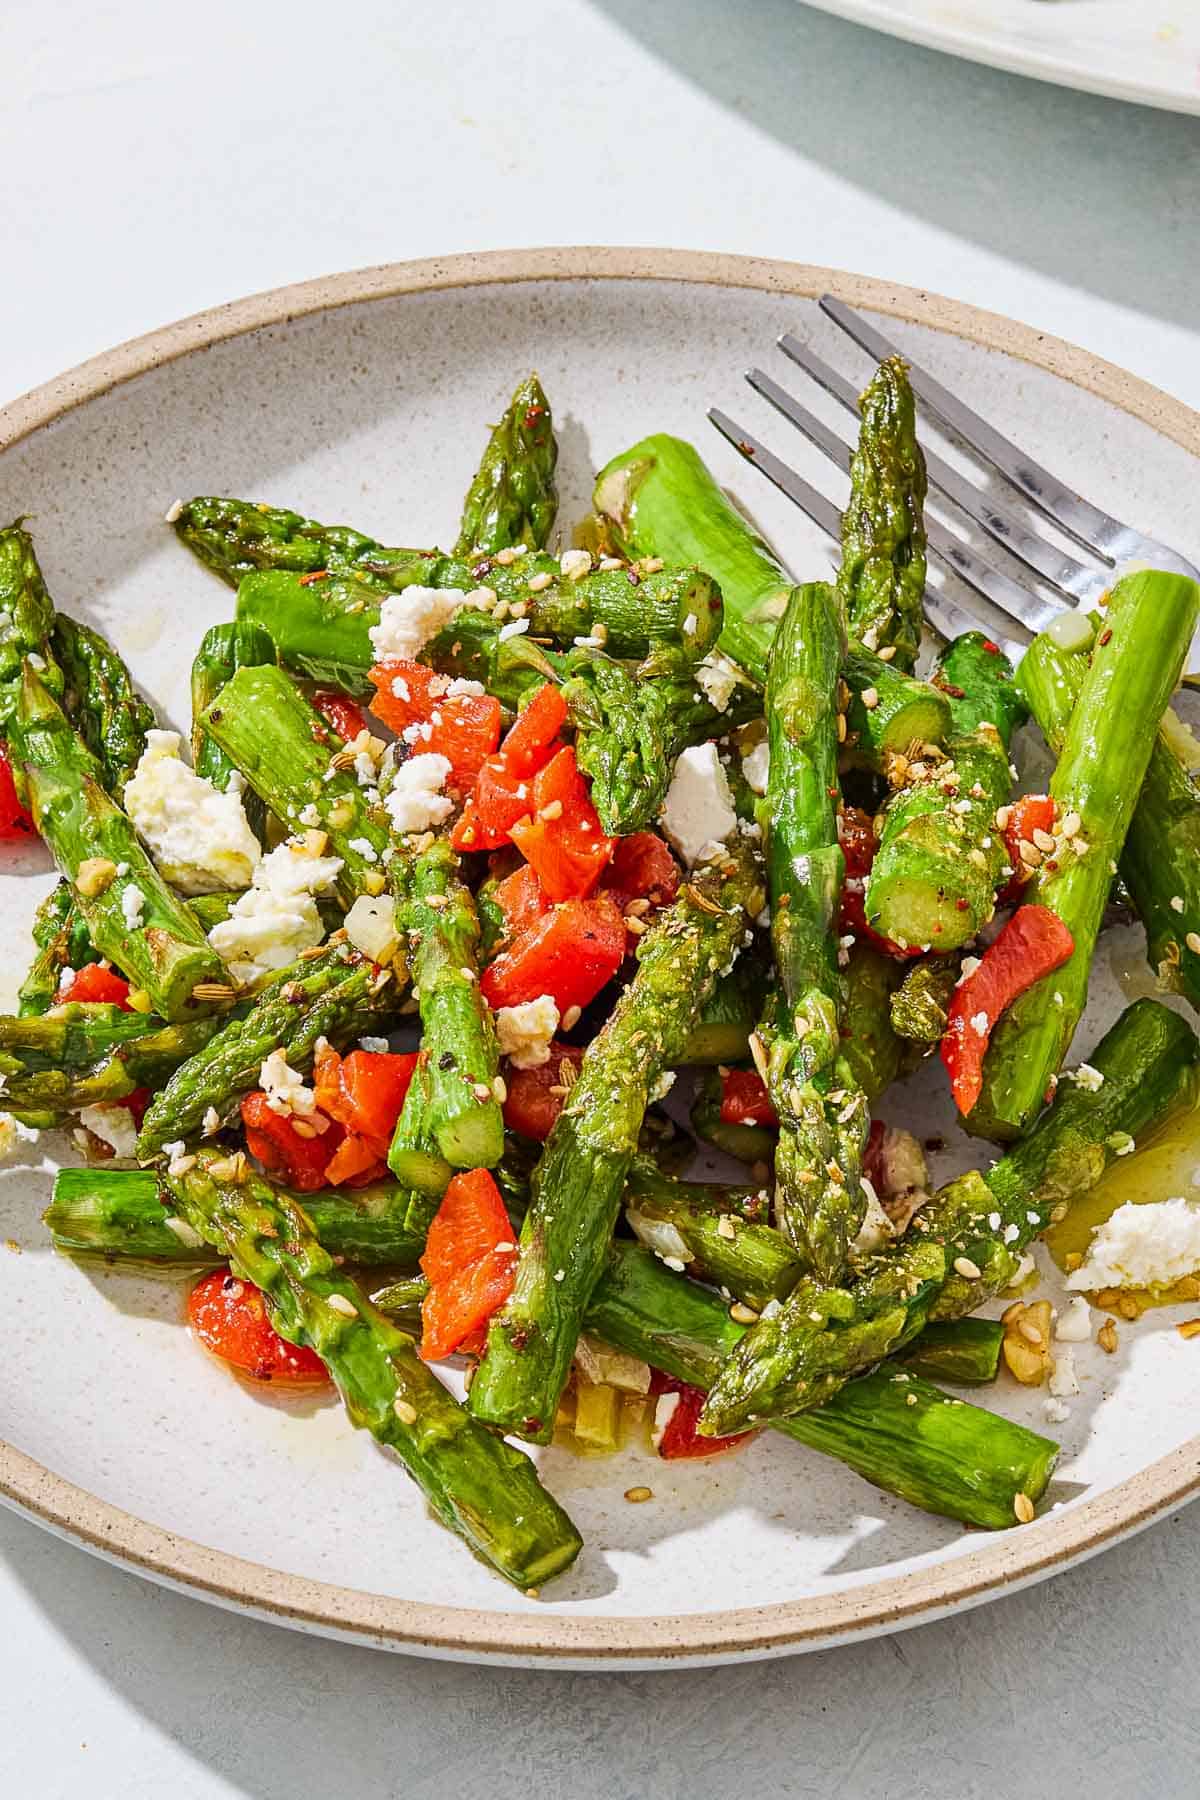 A close up of a serving of sauteed asparagus topped with chopped red peppers and crumbled feta on a plate with a fork.